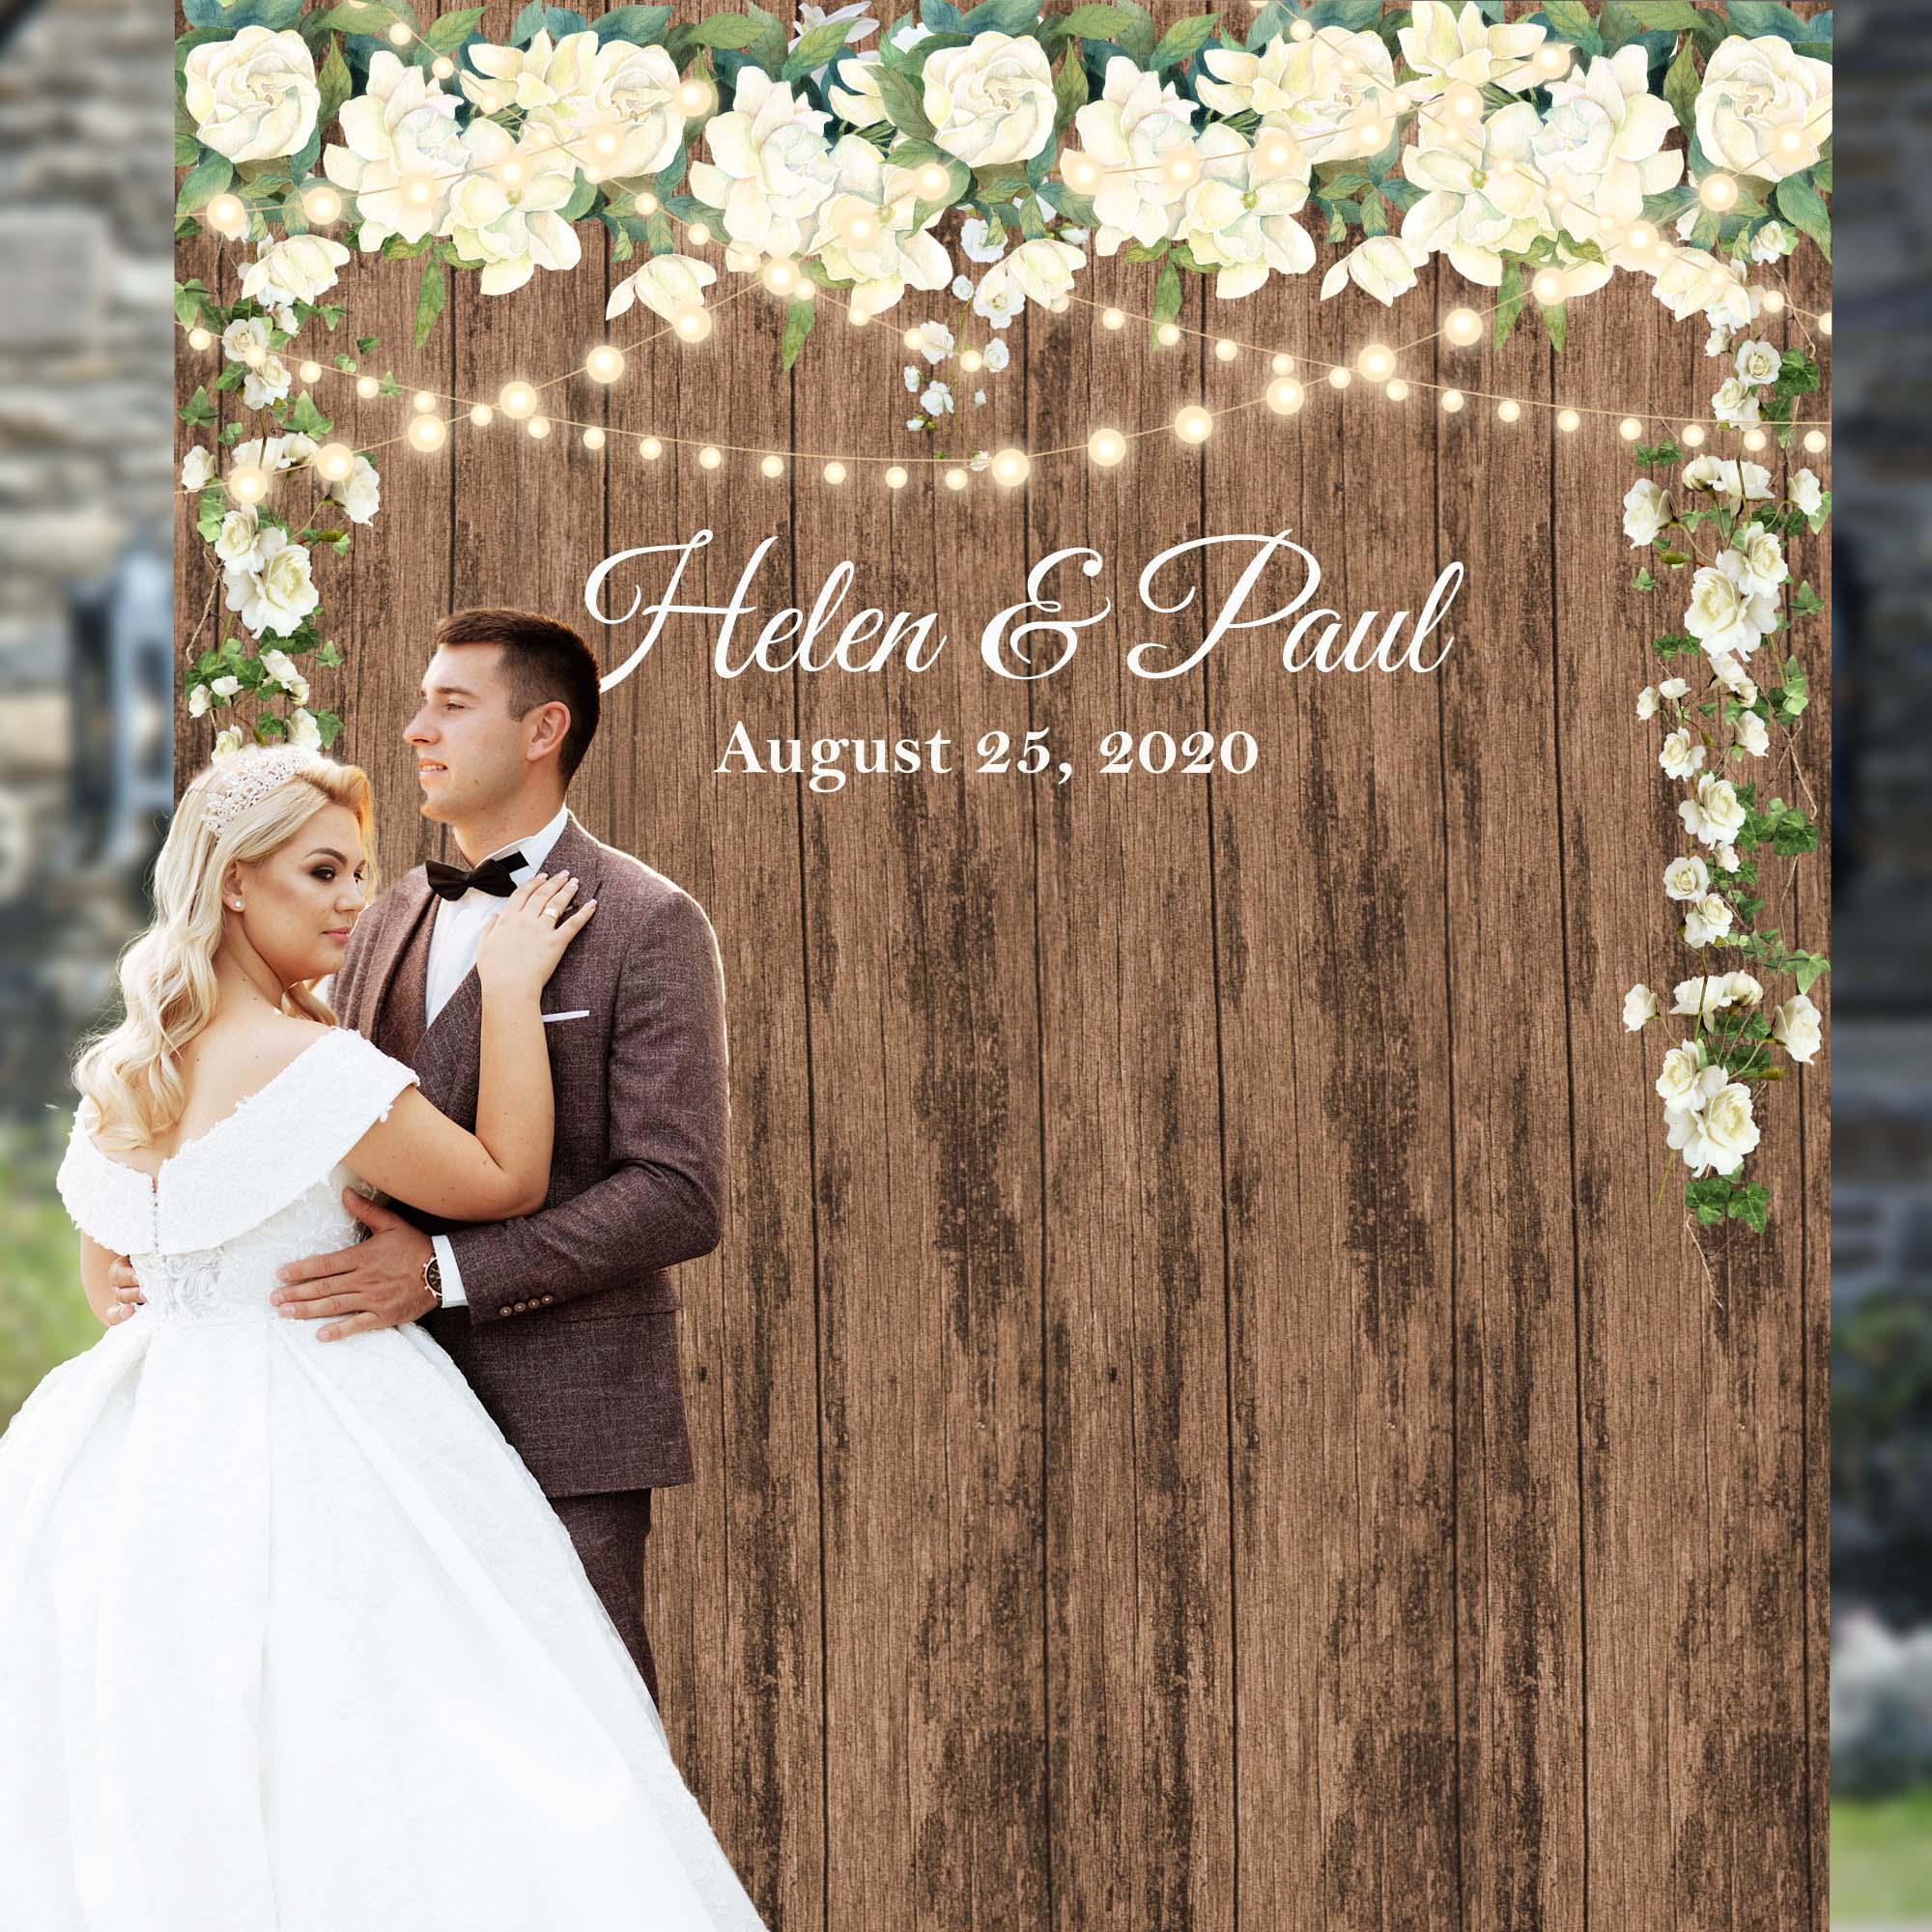 Rustic Wood Background With String Lights - iJay Backdrops